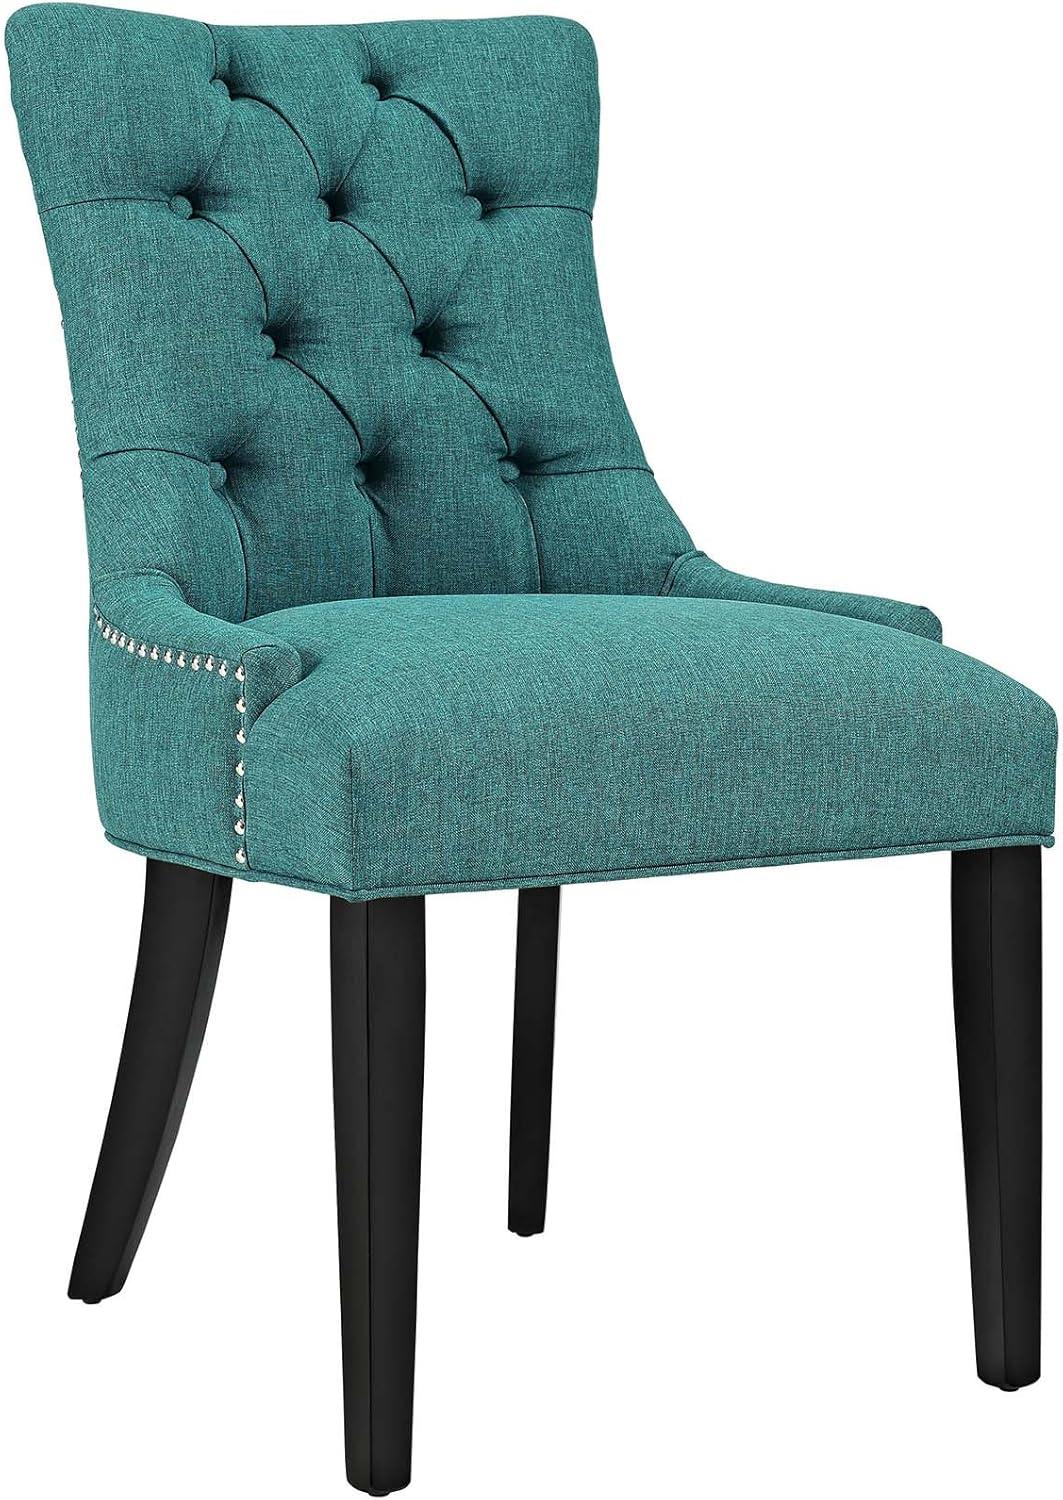 Elegant Teal Tufted Upholstered Side Chair with Nailhead Trim